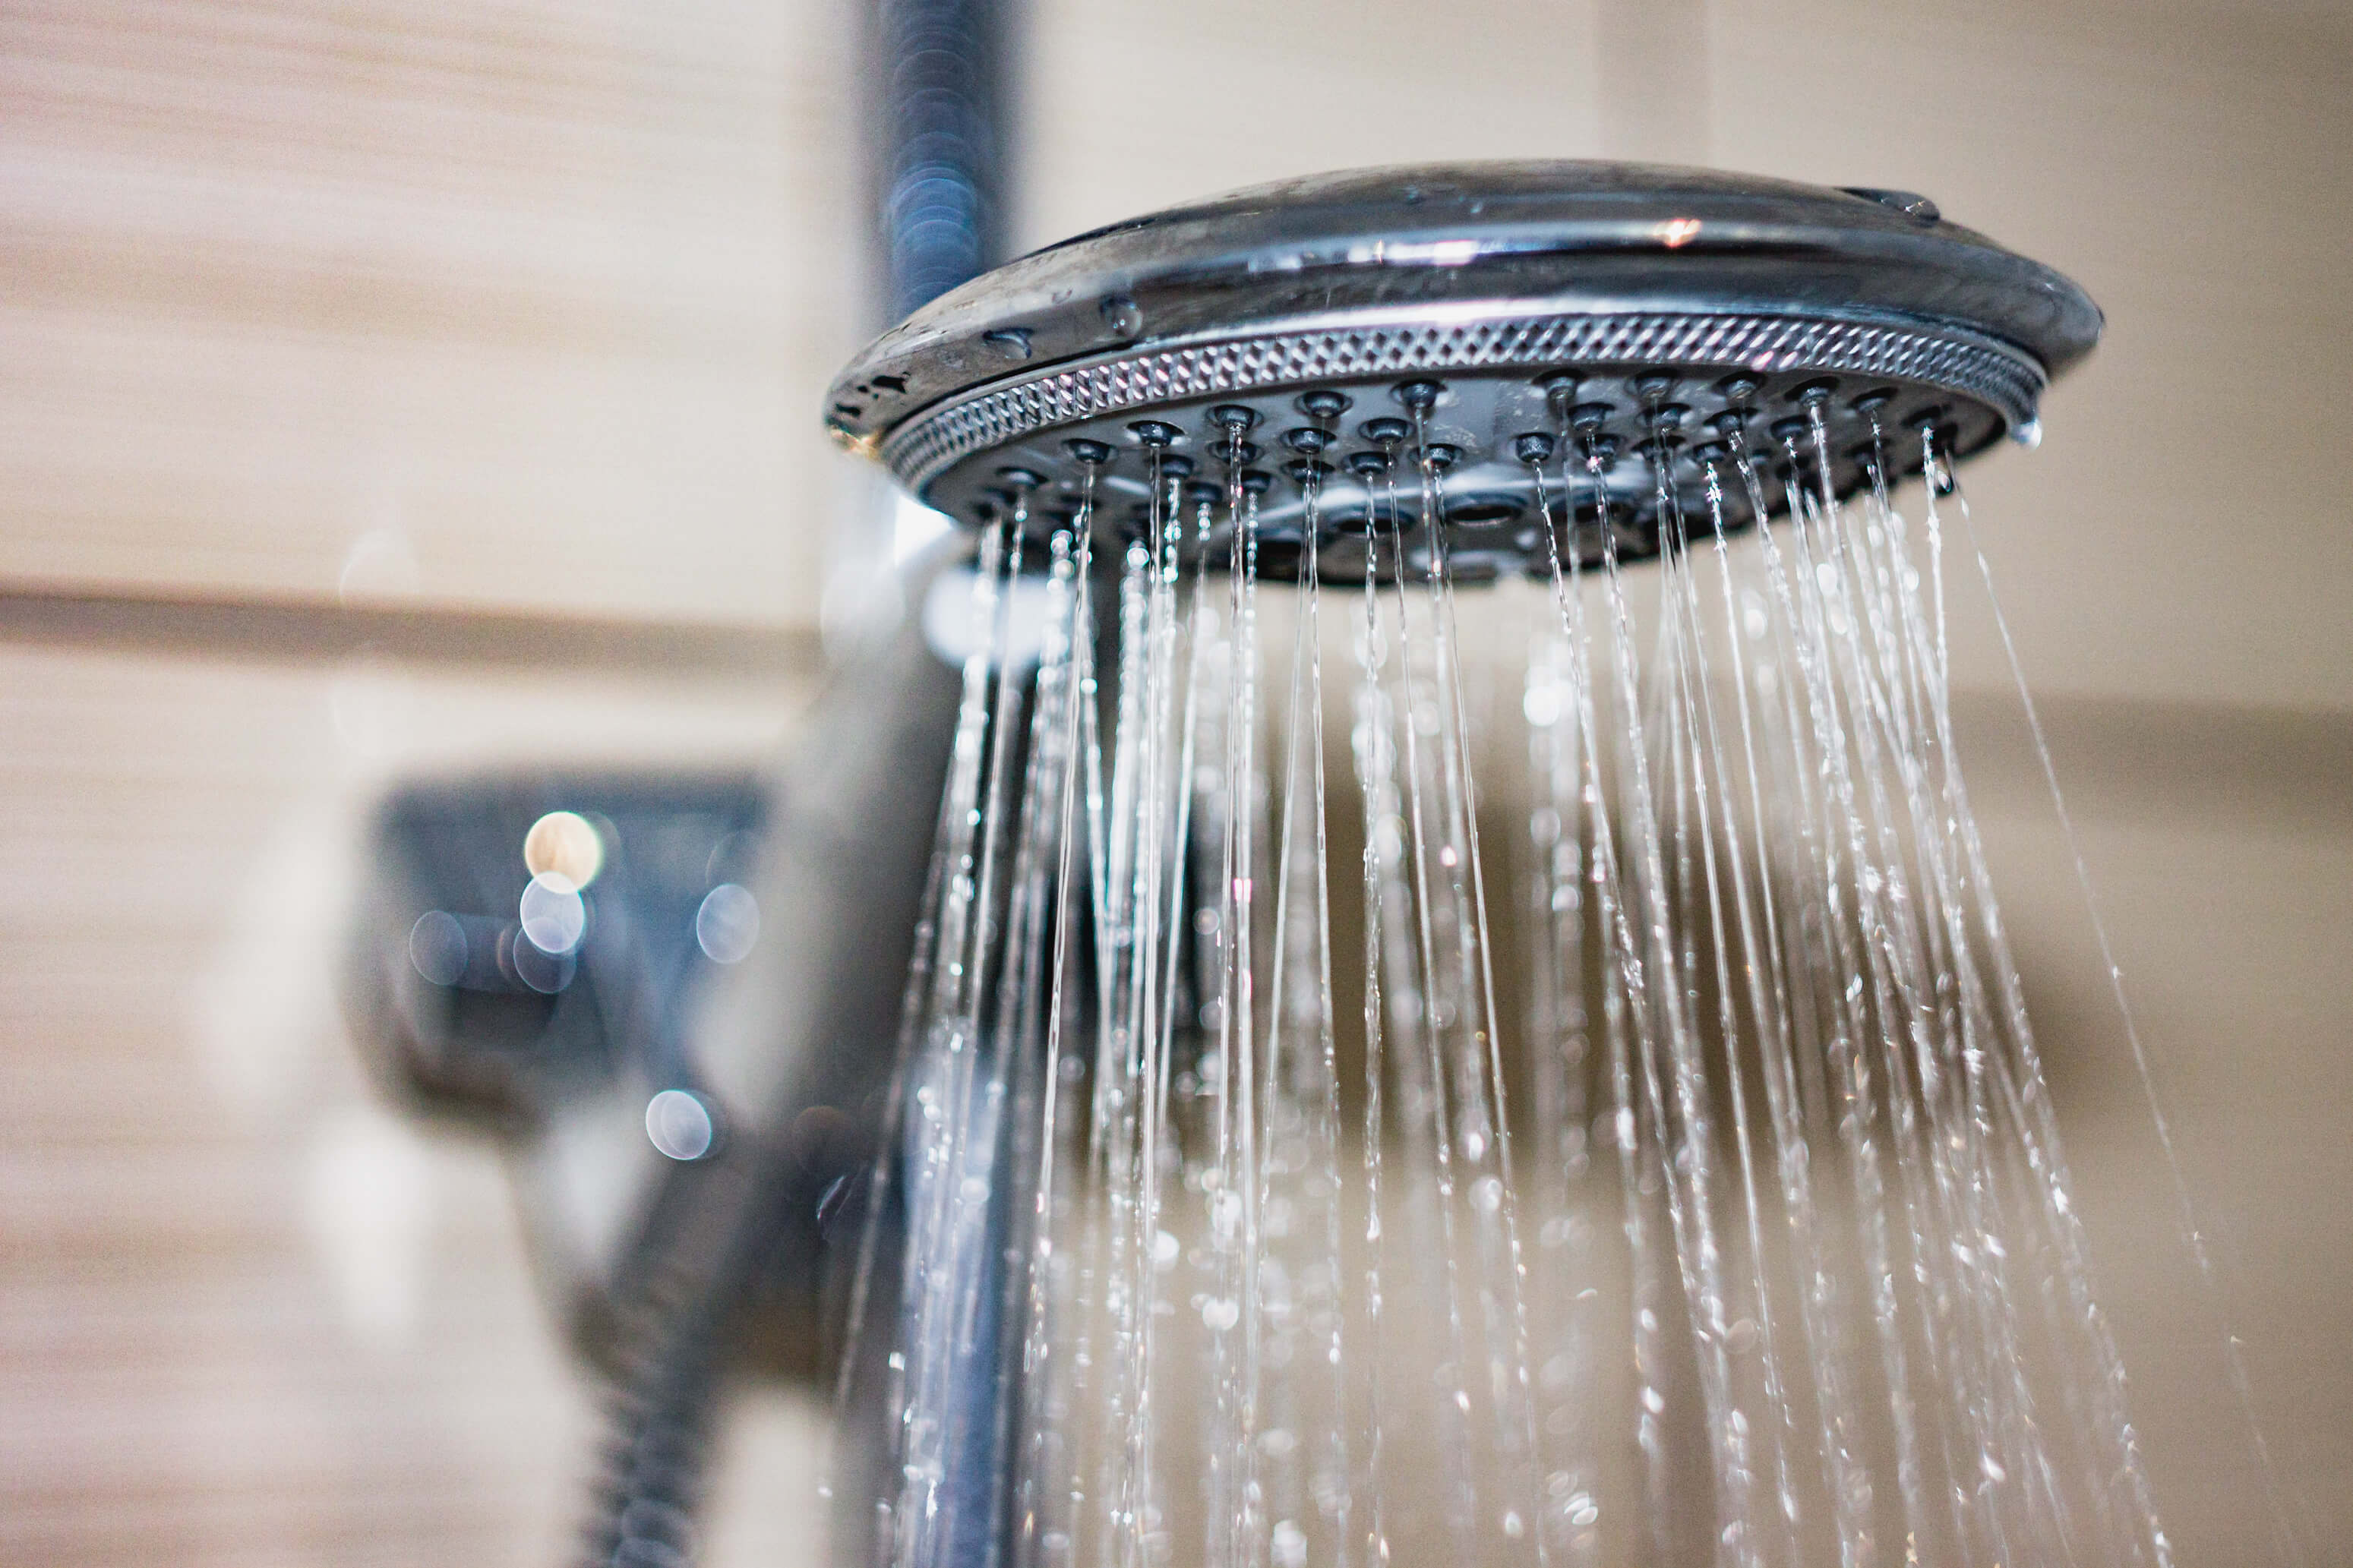 The Low Water Pressure Home Guide